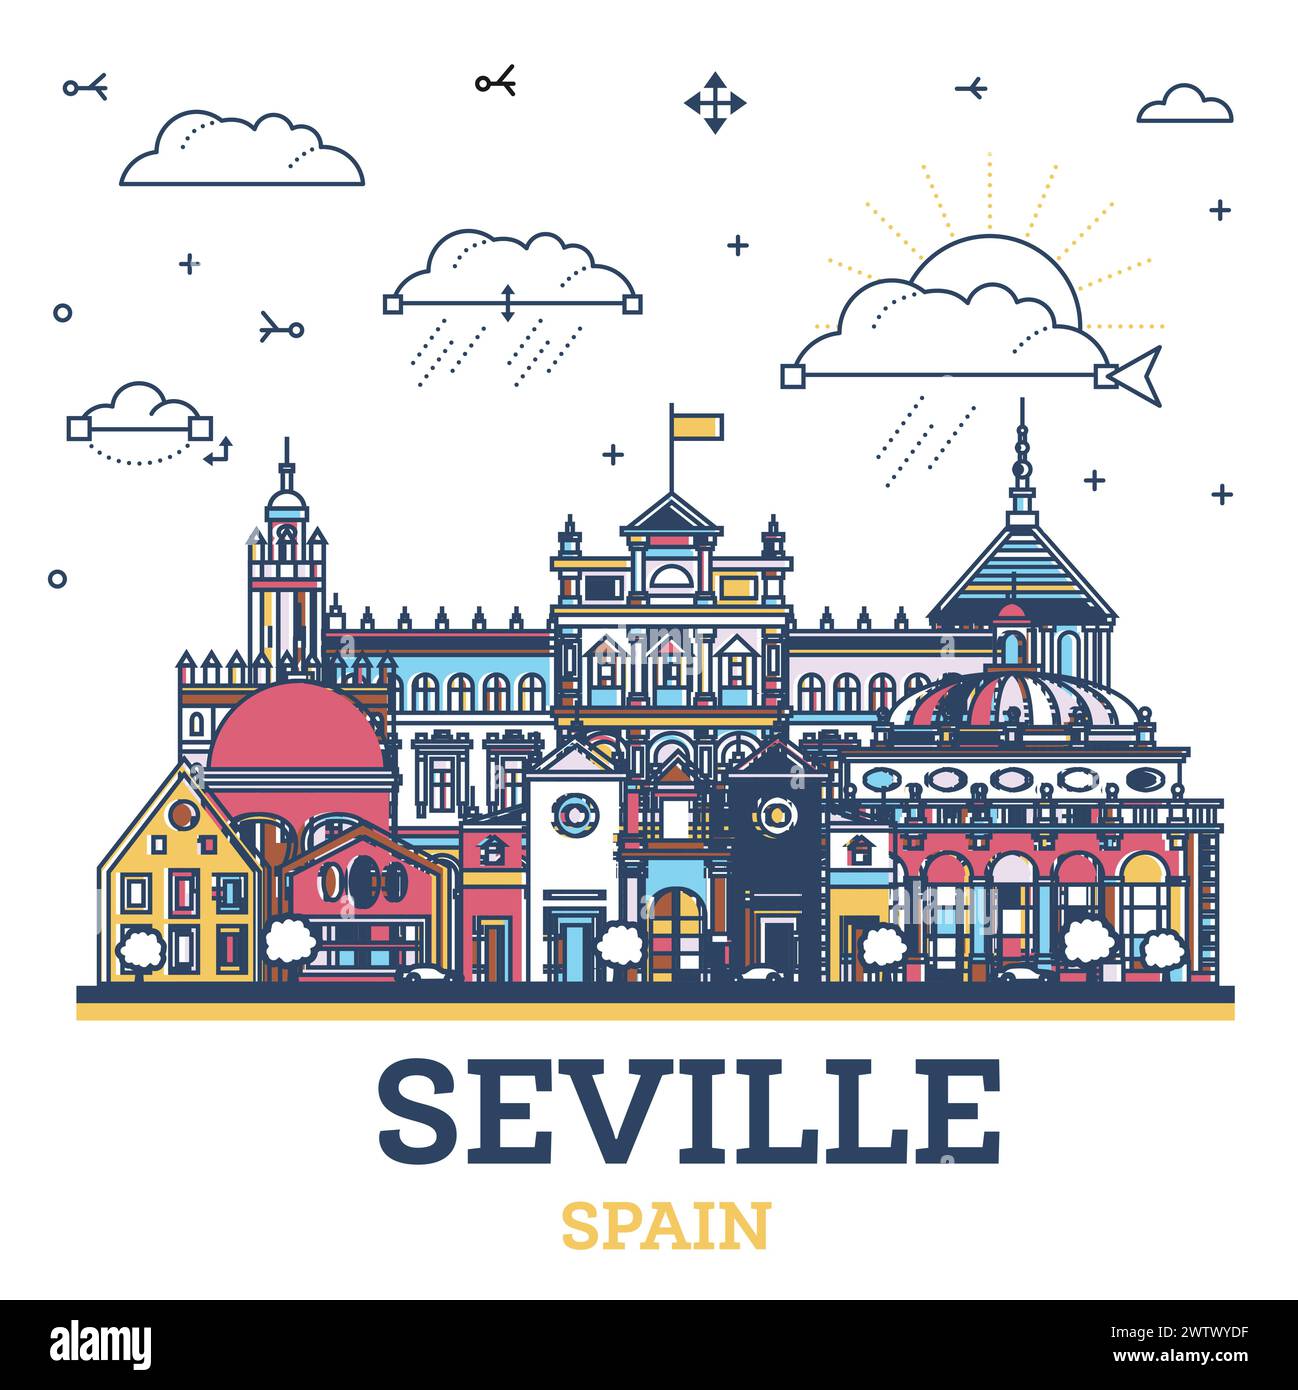 Outline Seville Spain City Skyline with colored Historic Buildings Isolated on White. Vector Illustration. Seville Cityscape with Landmarks. Stock Vector